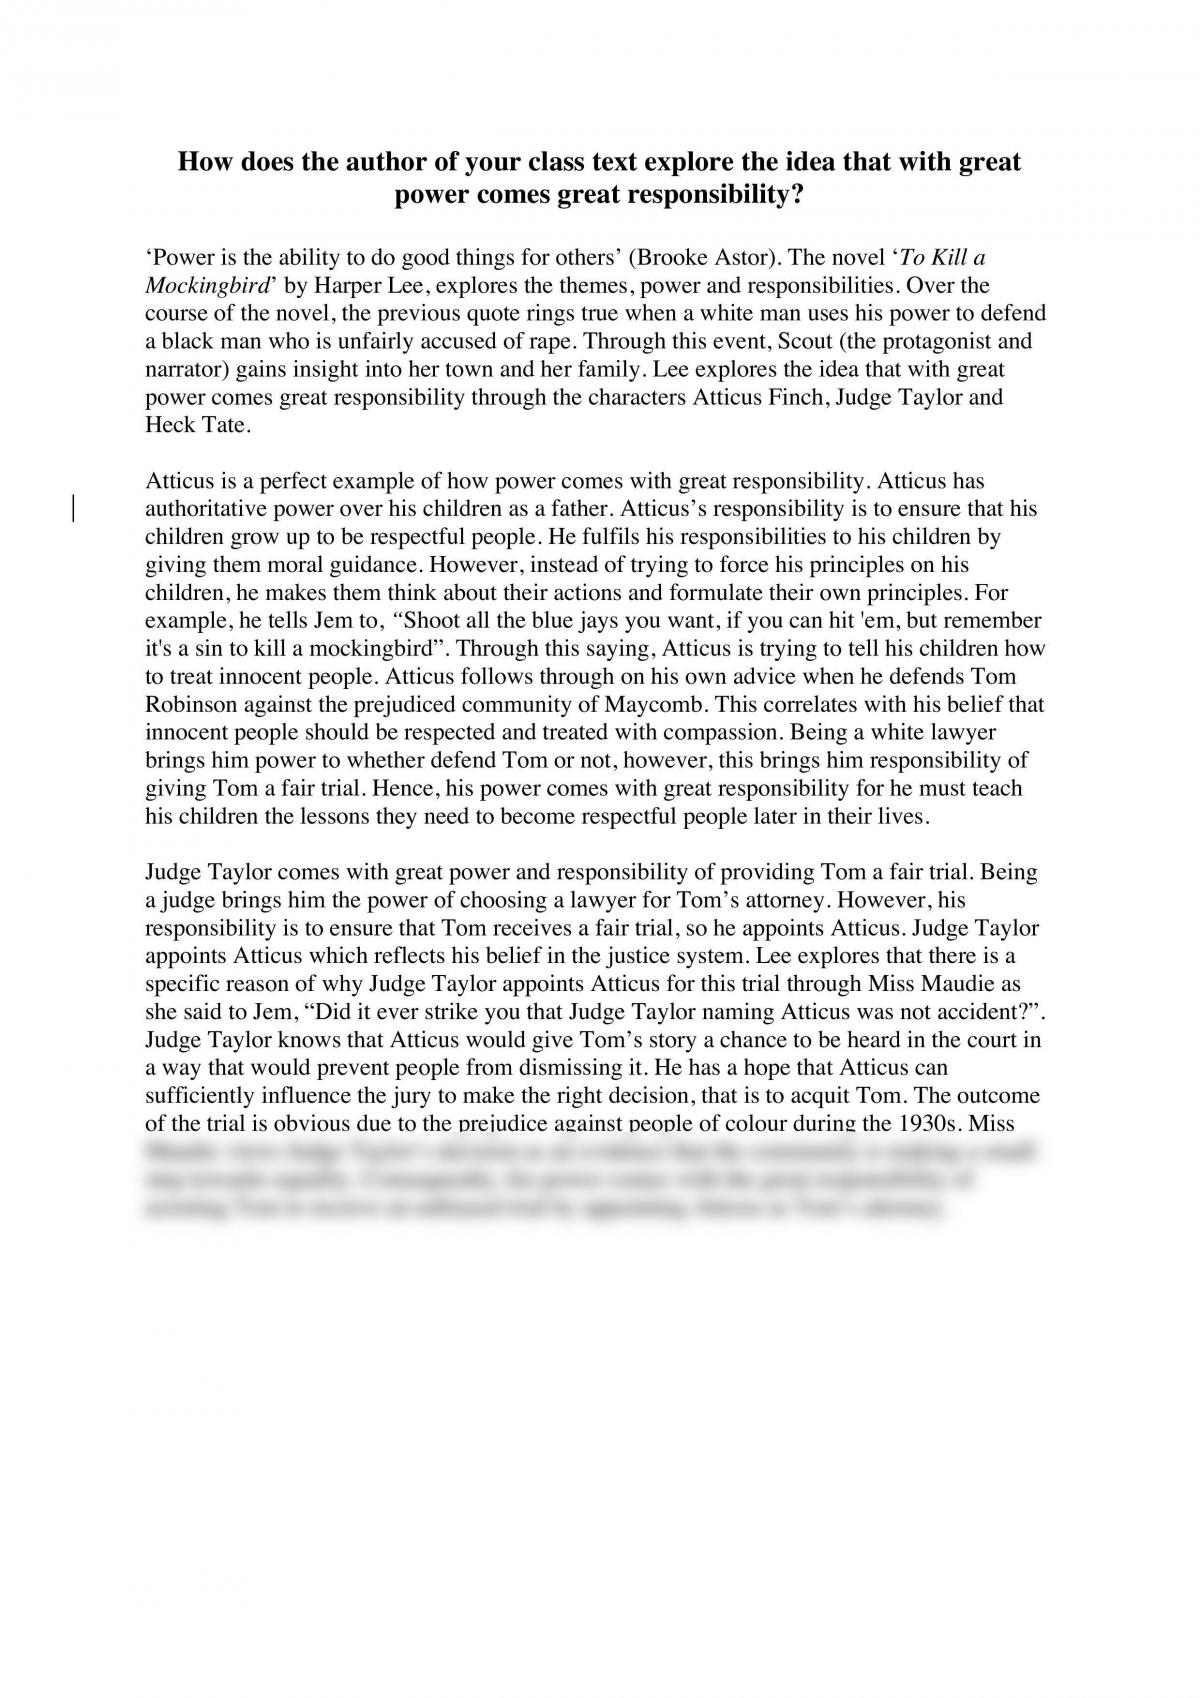 To Kill a Mockingbird Analysis of Power and Responsibility - Page 1